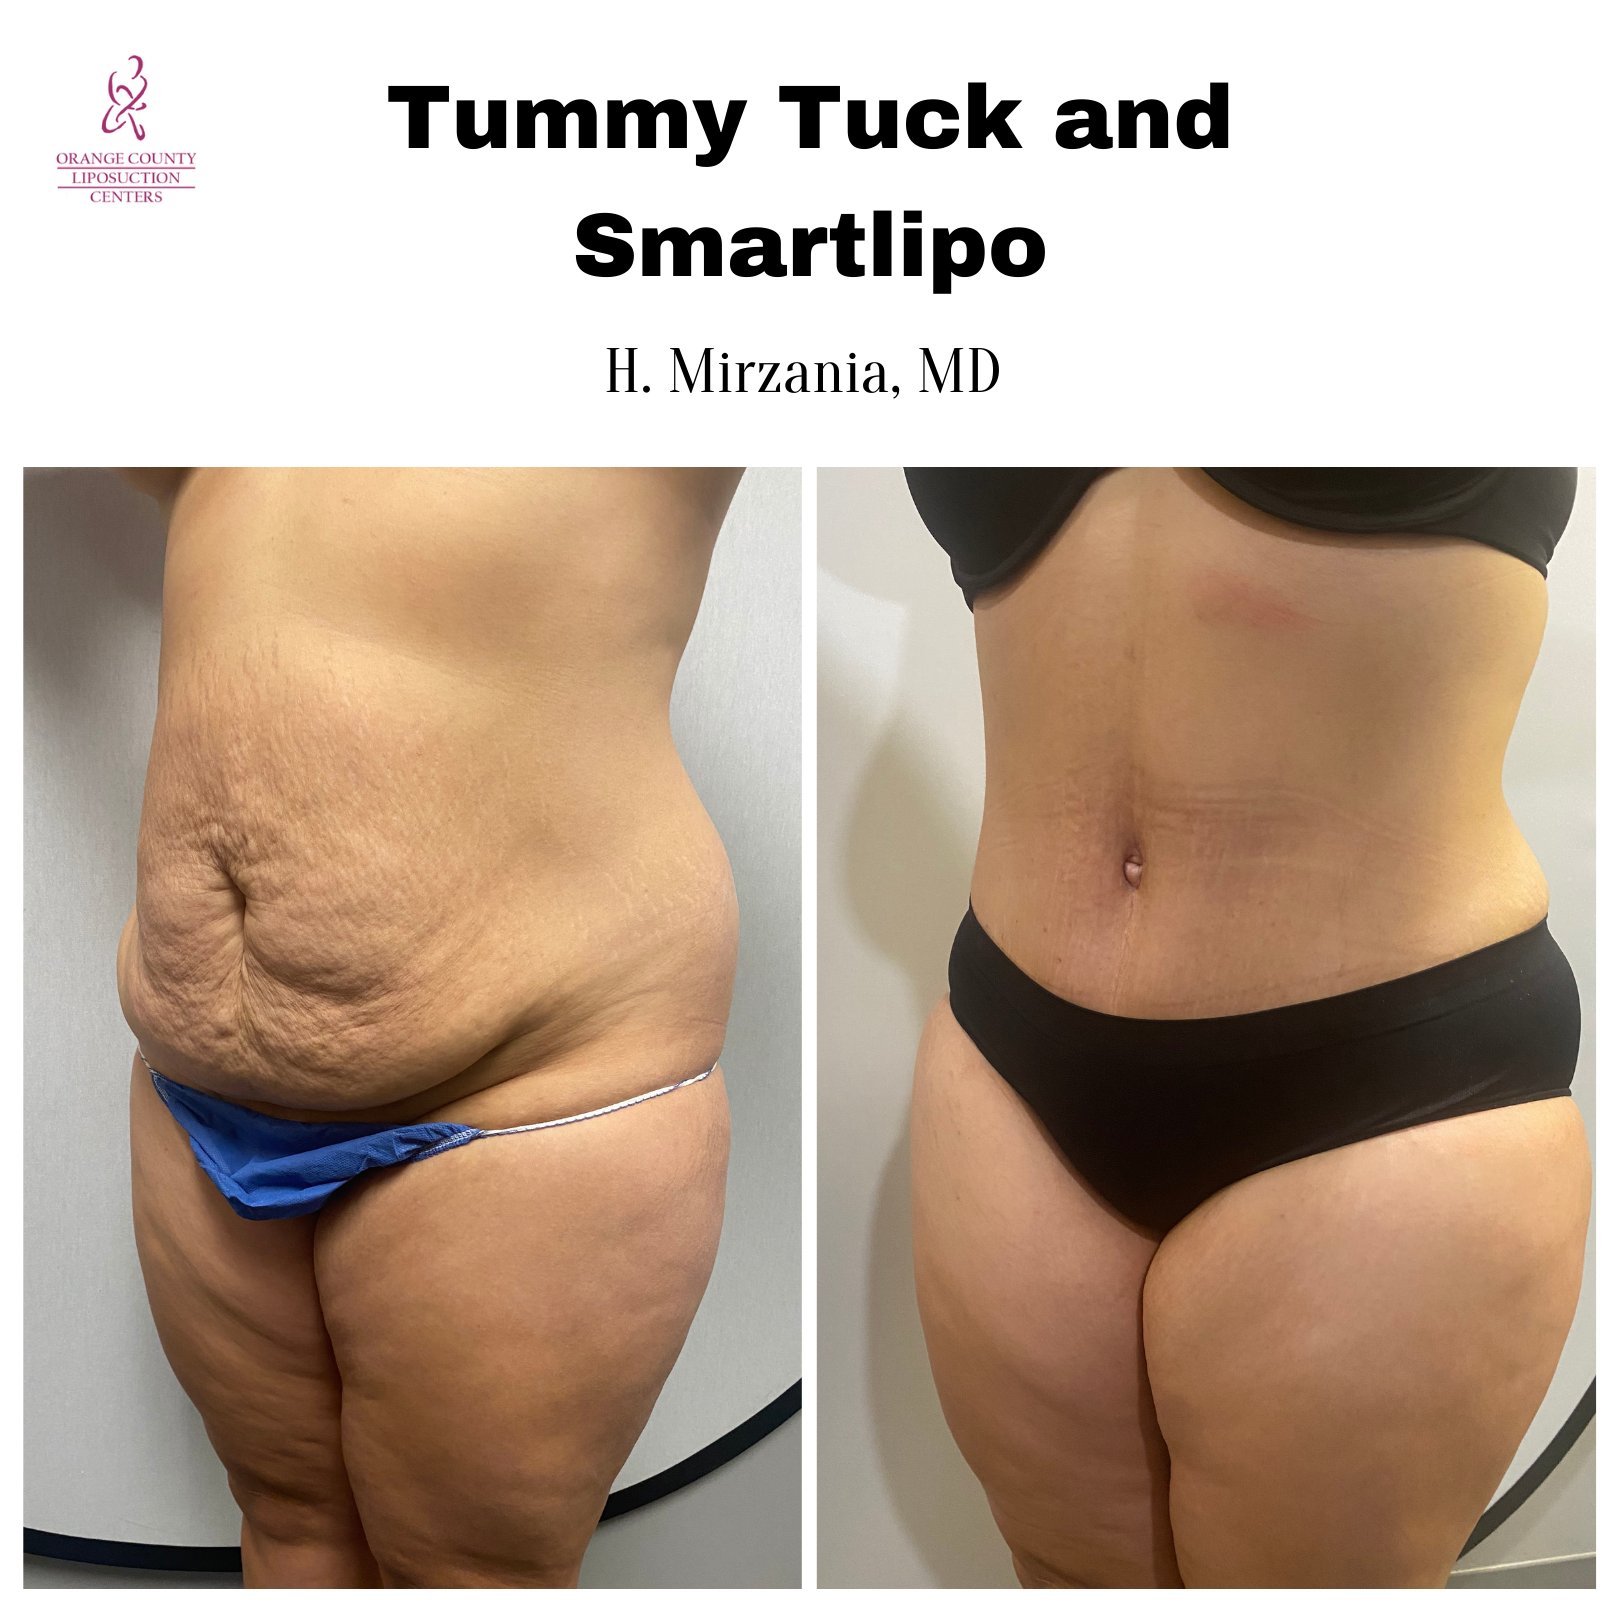 Los Angeles Liposuction Centers on X: Female patient 5 weeks after her  Full Tummy Tuck with Smartlipo 360. Amazing results all with local  anesthesia! Procedure performed by H. Mirzania, MD. #fulltummytuck # tummytuck #